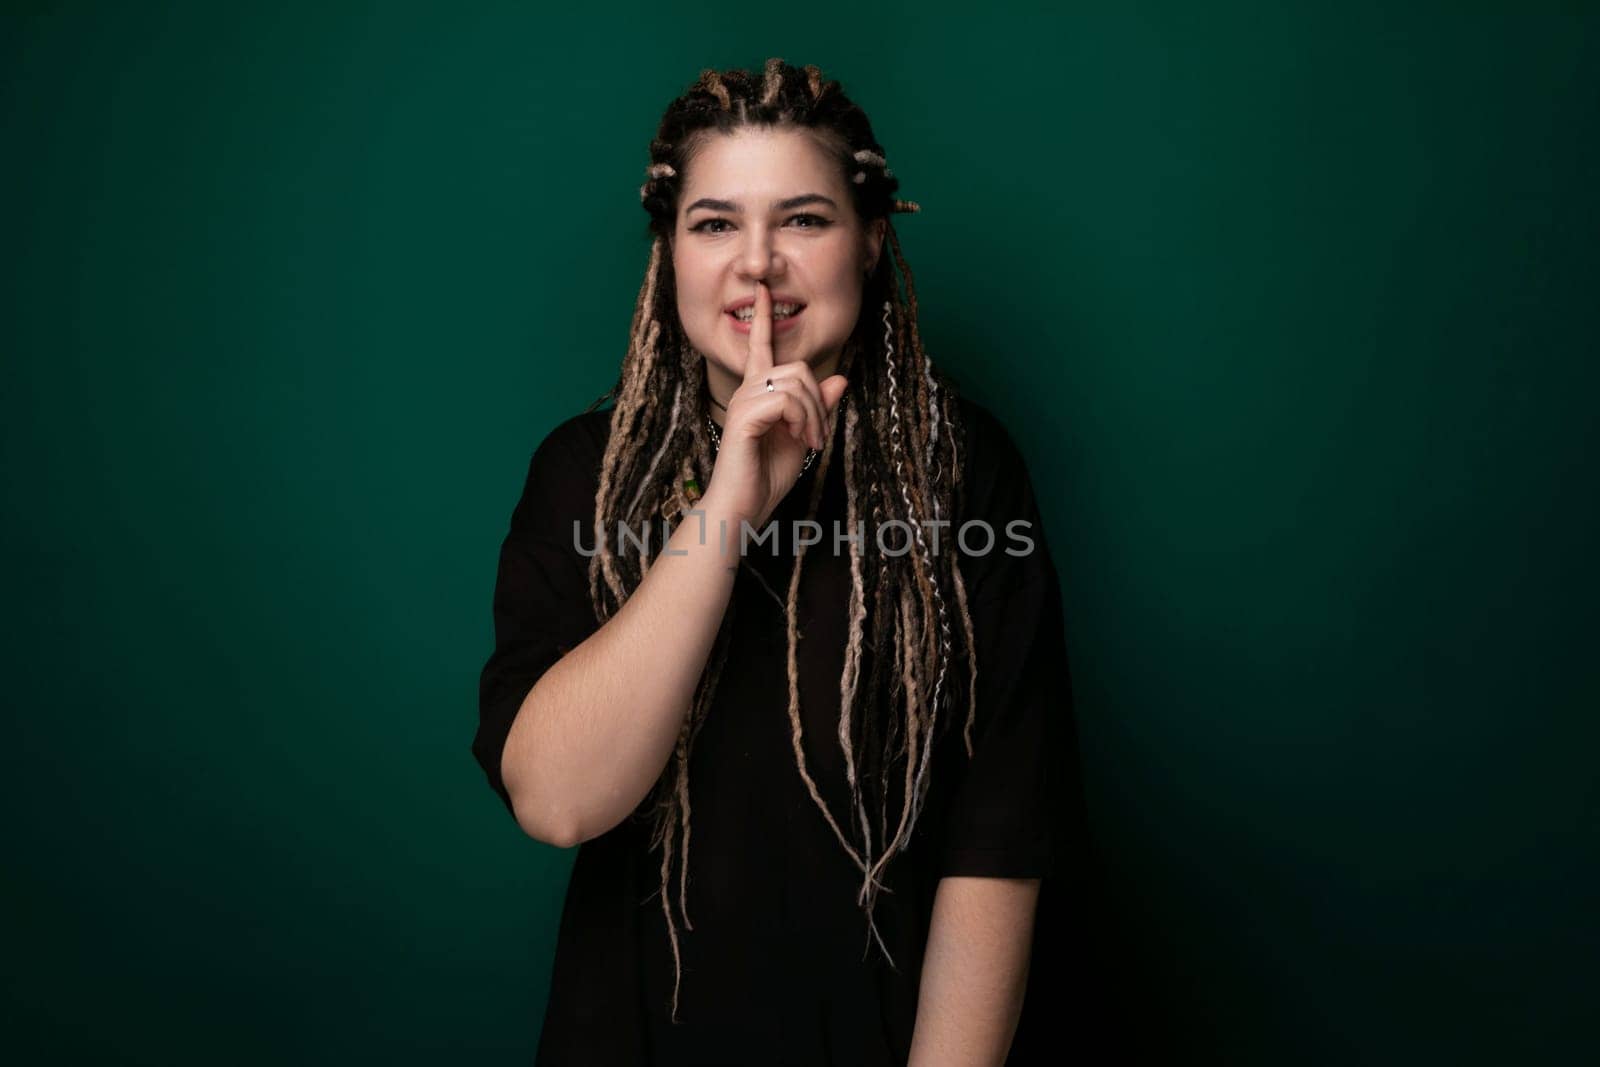 Woman With Long Dreadlocks Standing in Front of Green Wall by TRMK